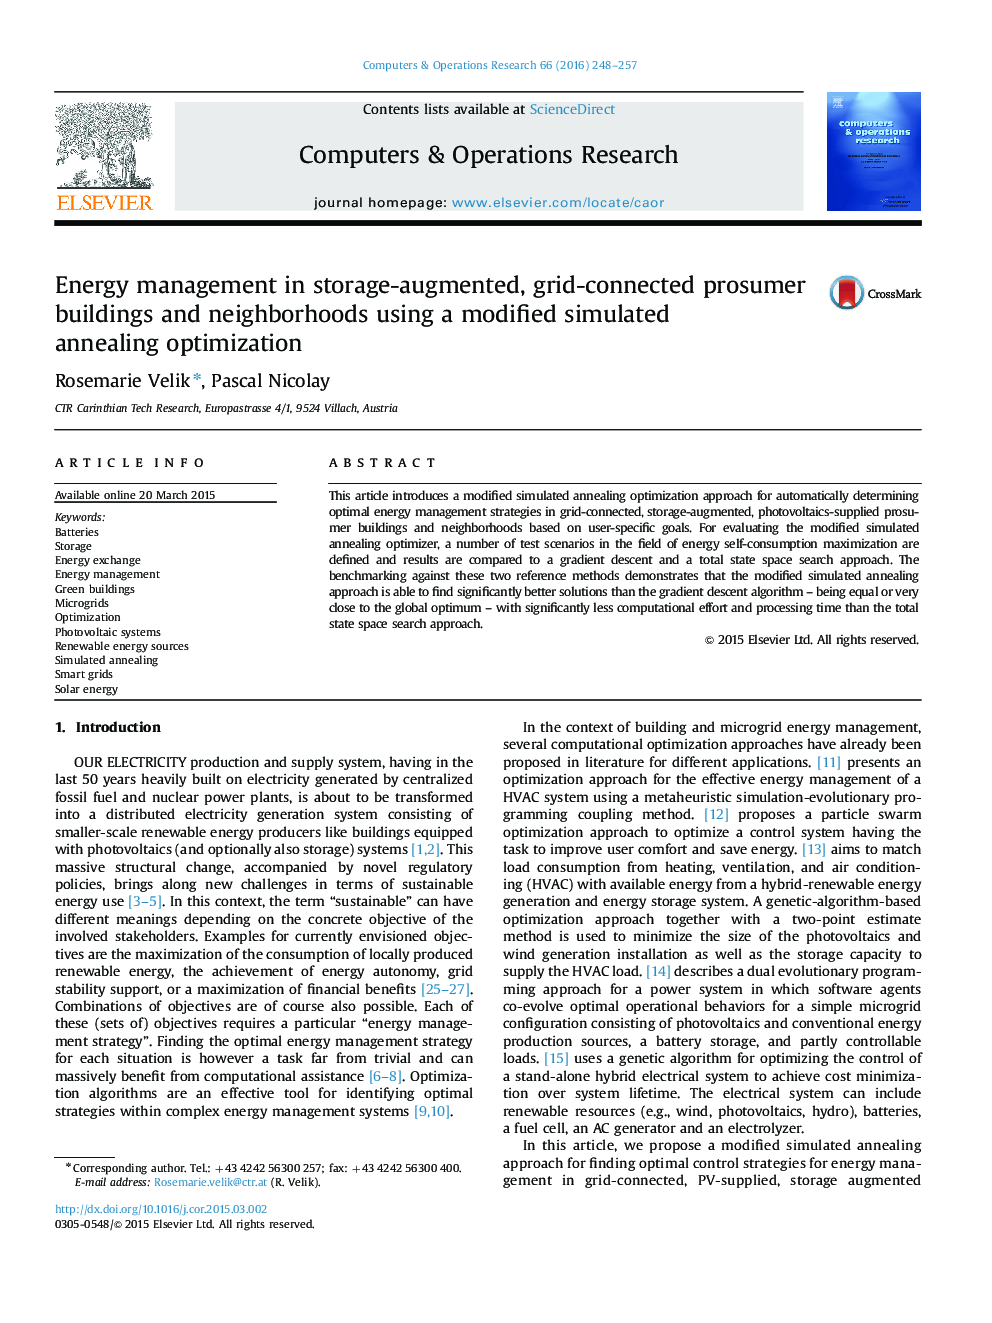 Energy management in storage-augmented, grid-connected prosumer buildings and neighborhoods using a modified simulated annealing optimization